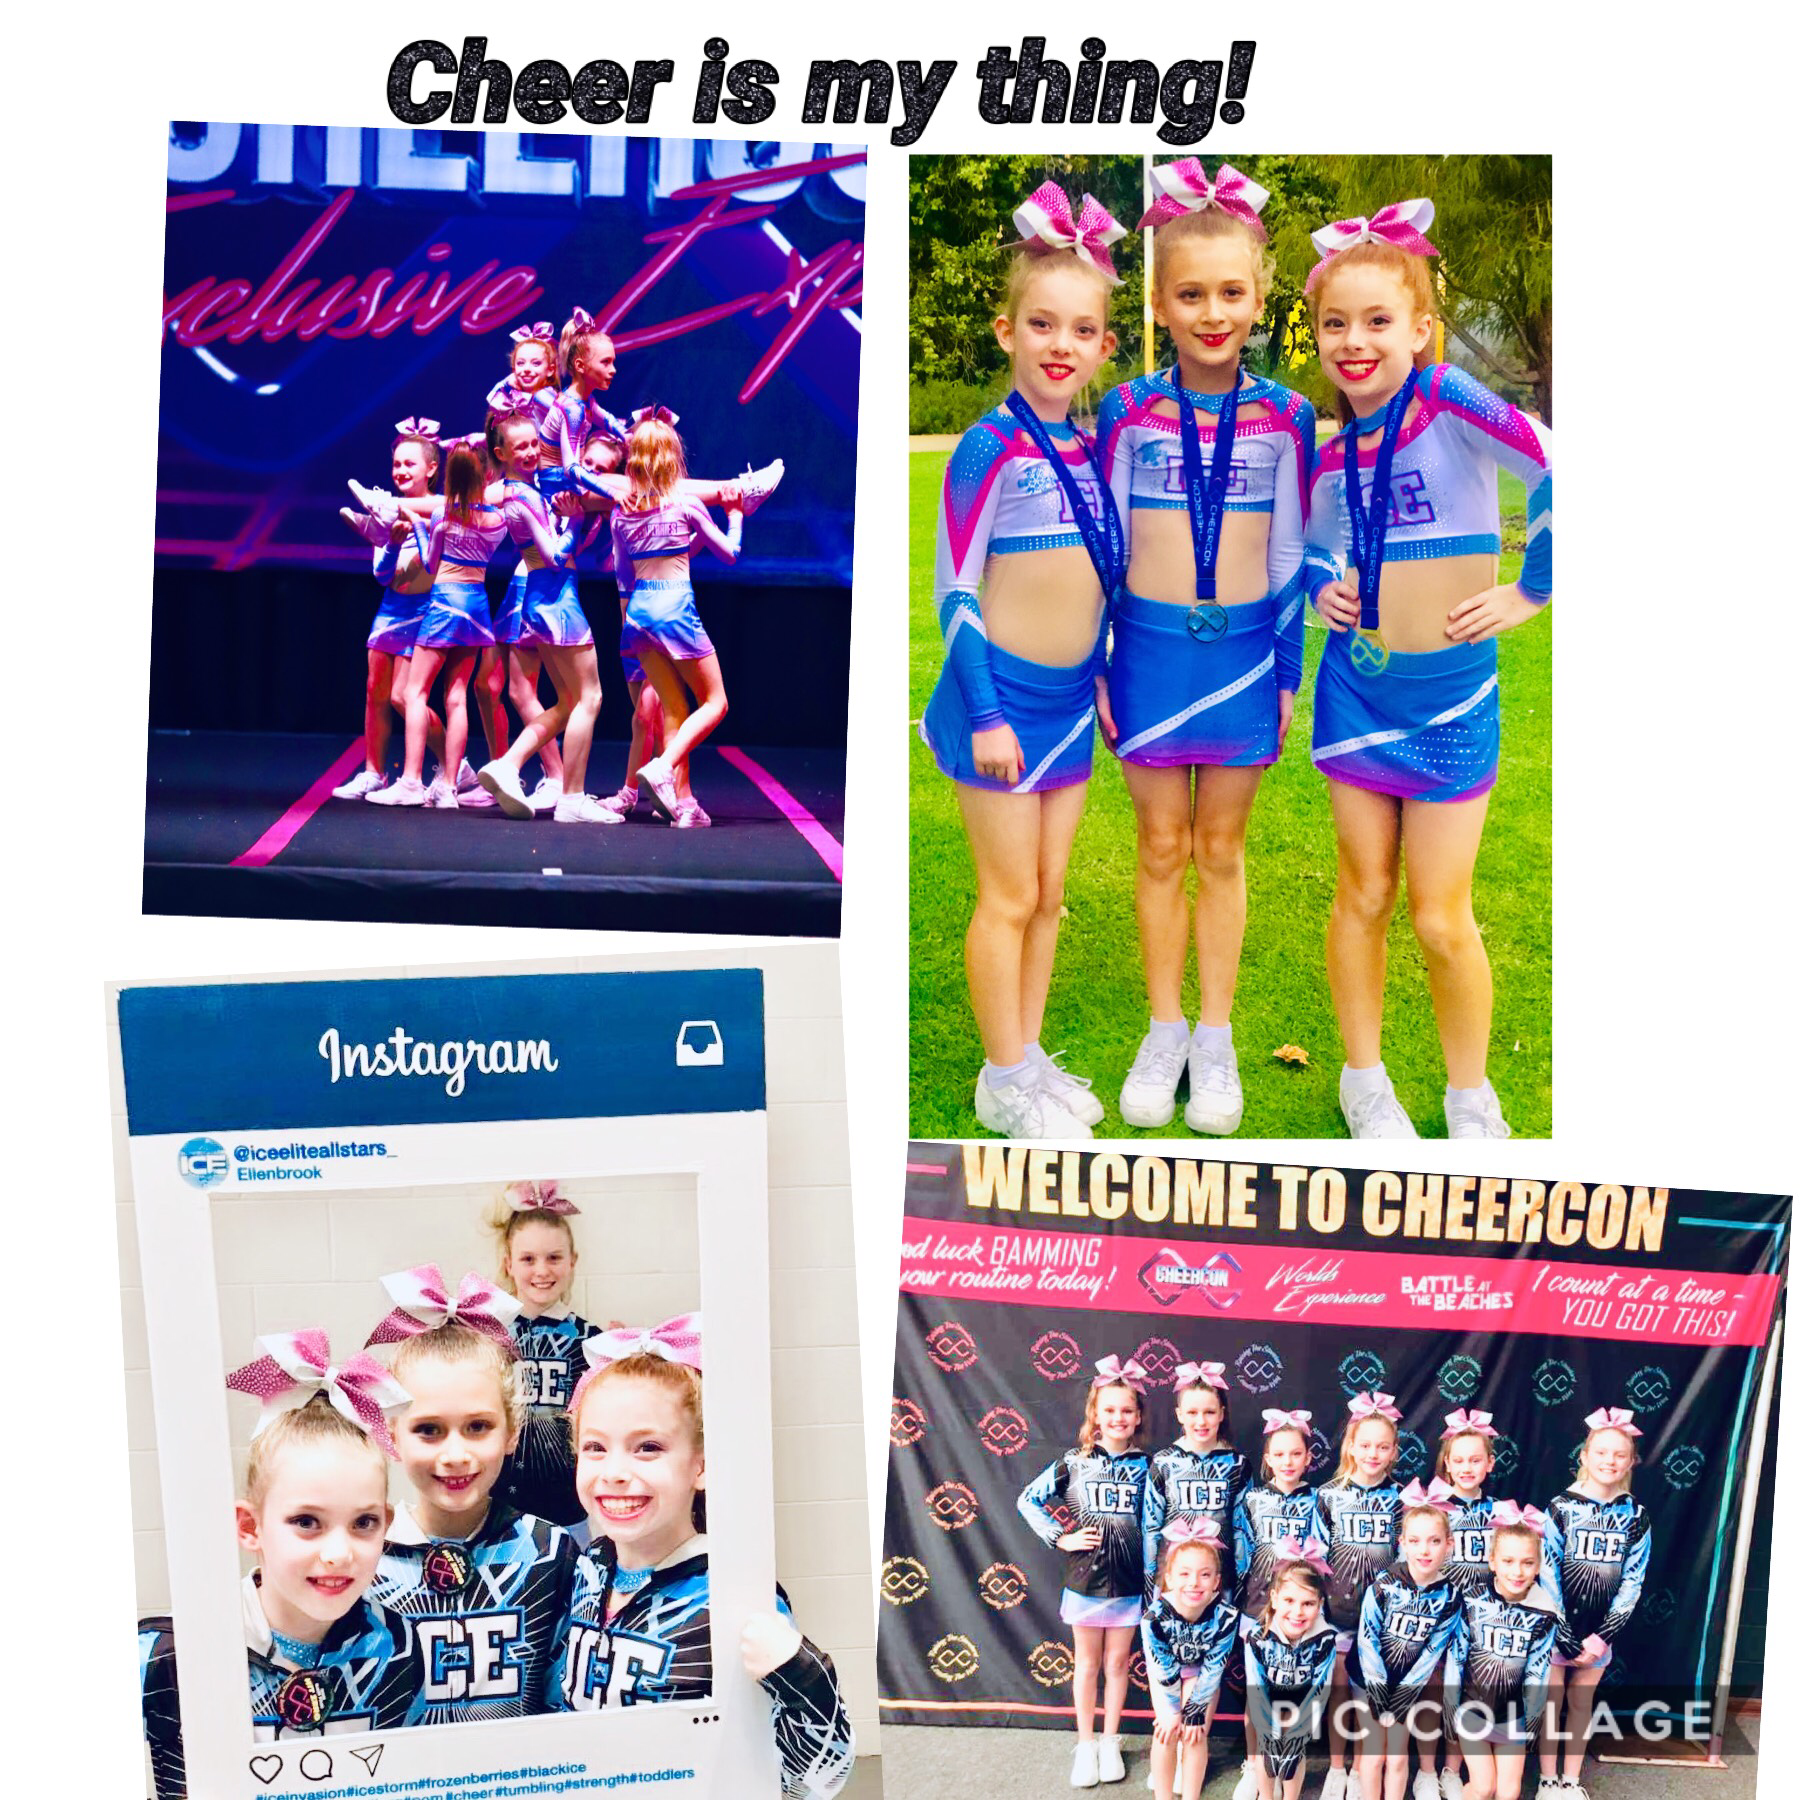 I love doing cheerleading! It’s my type of thing and if you try to talk me it of it don’t .